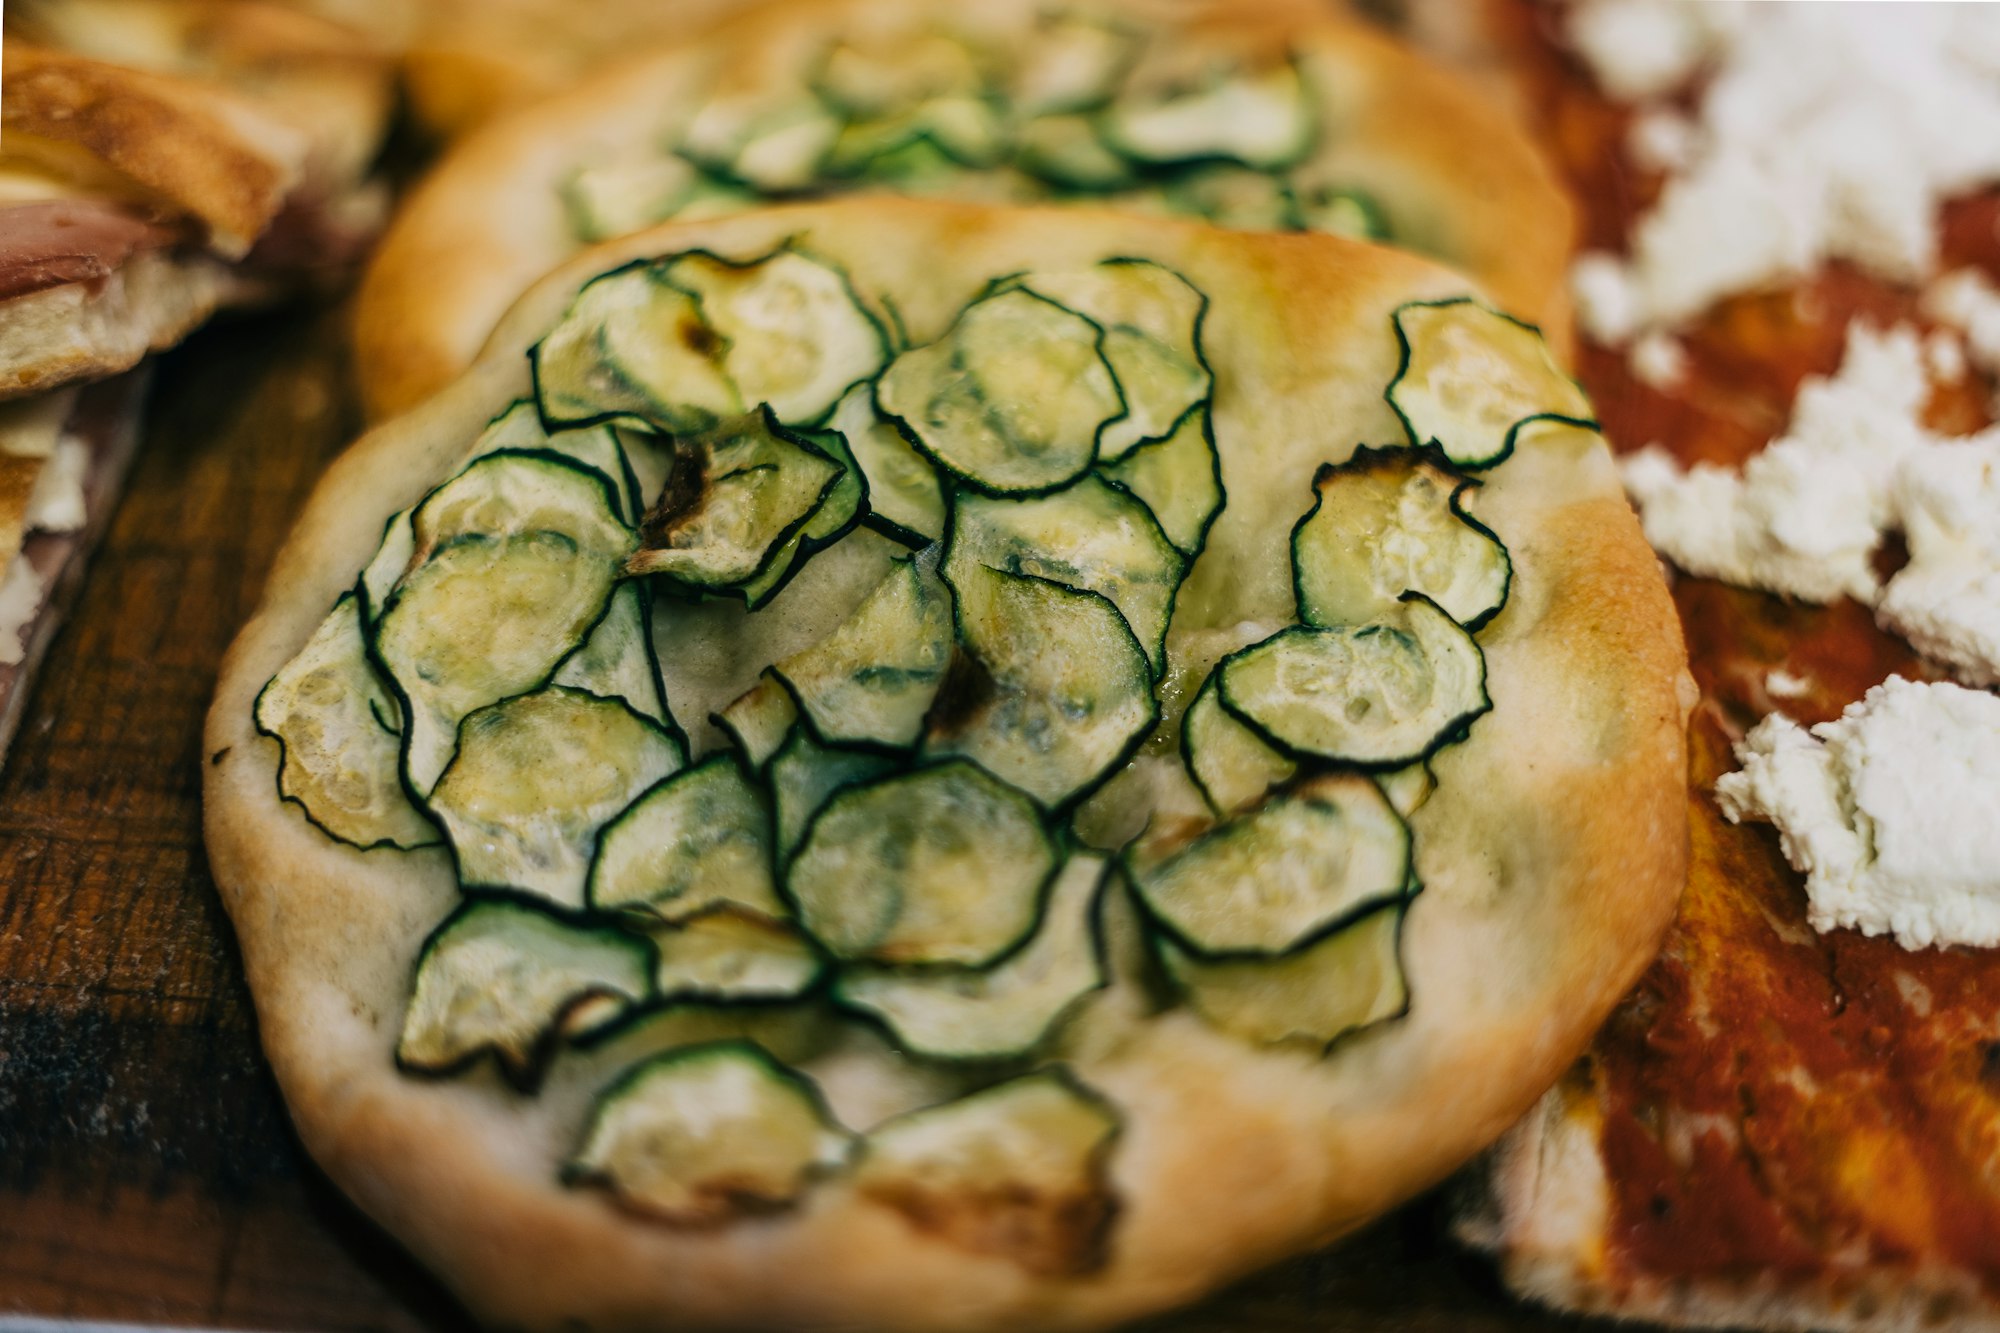 A typical variety of Roman pizza or "pizzetta" topped with zucchini